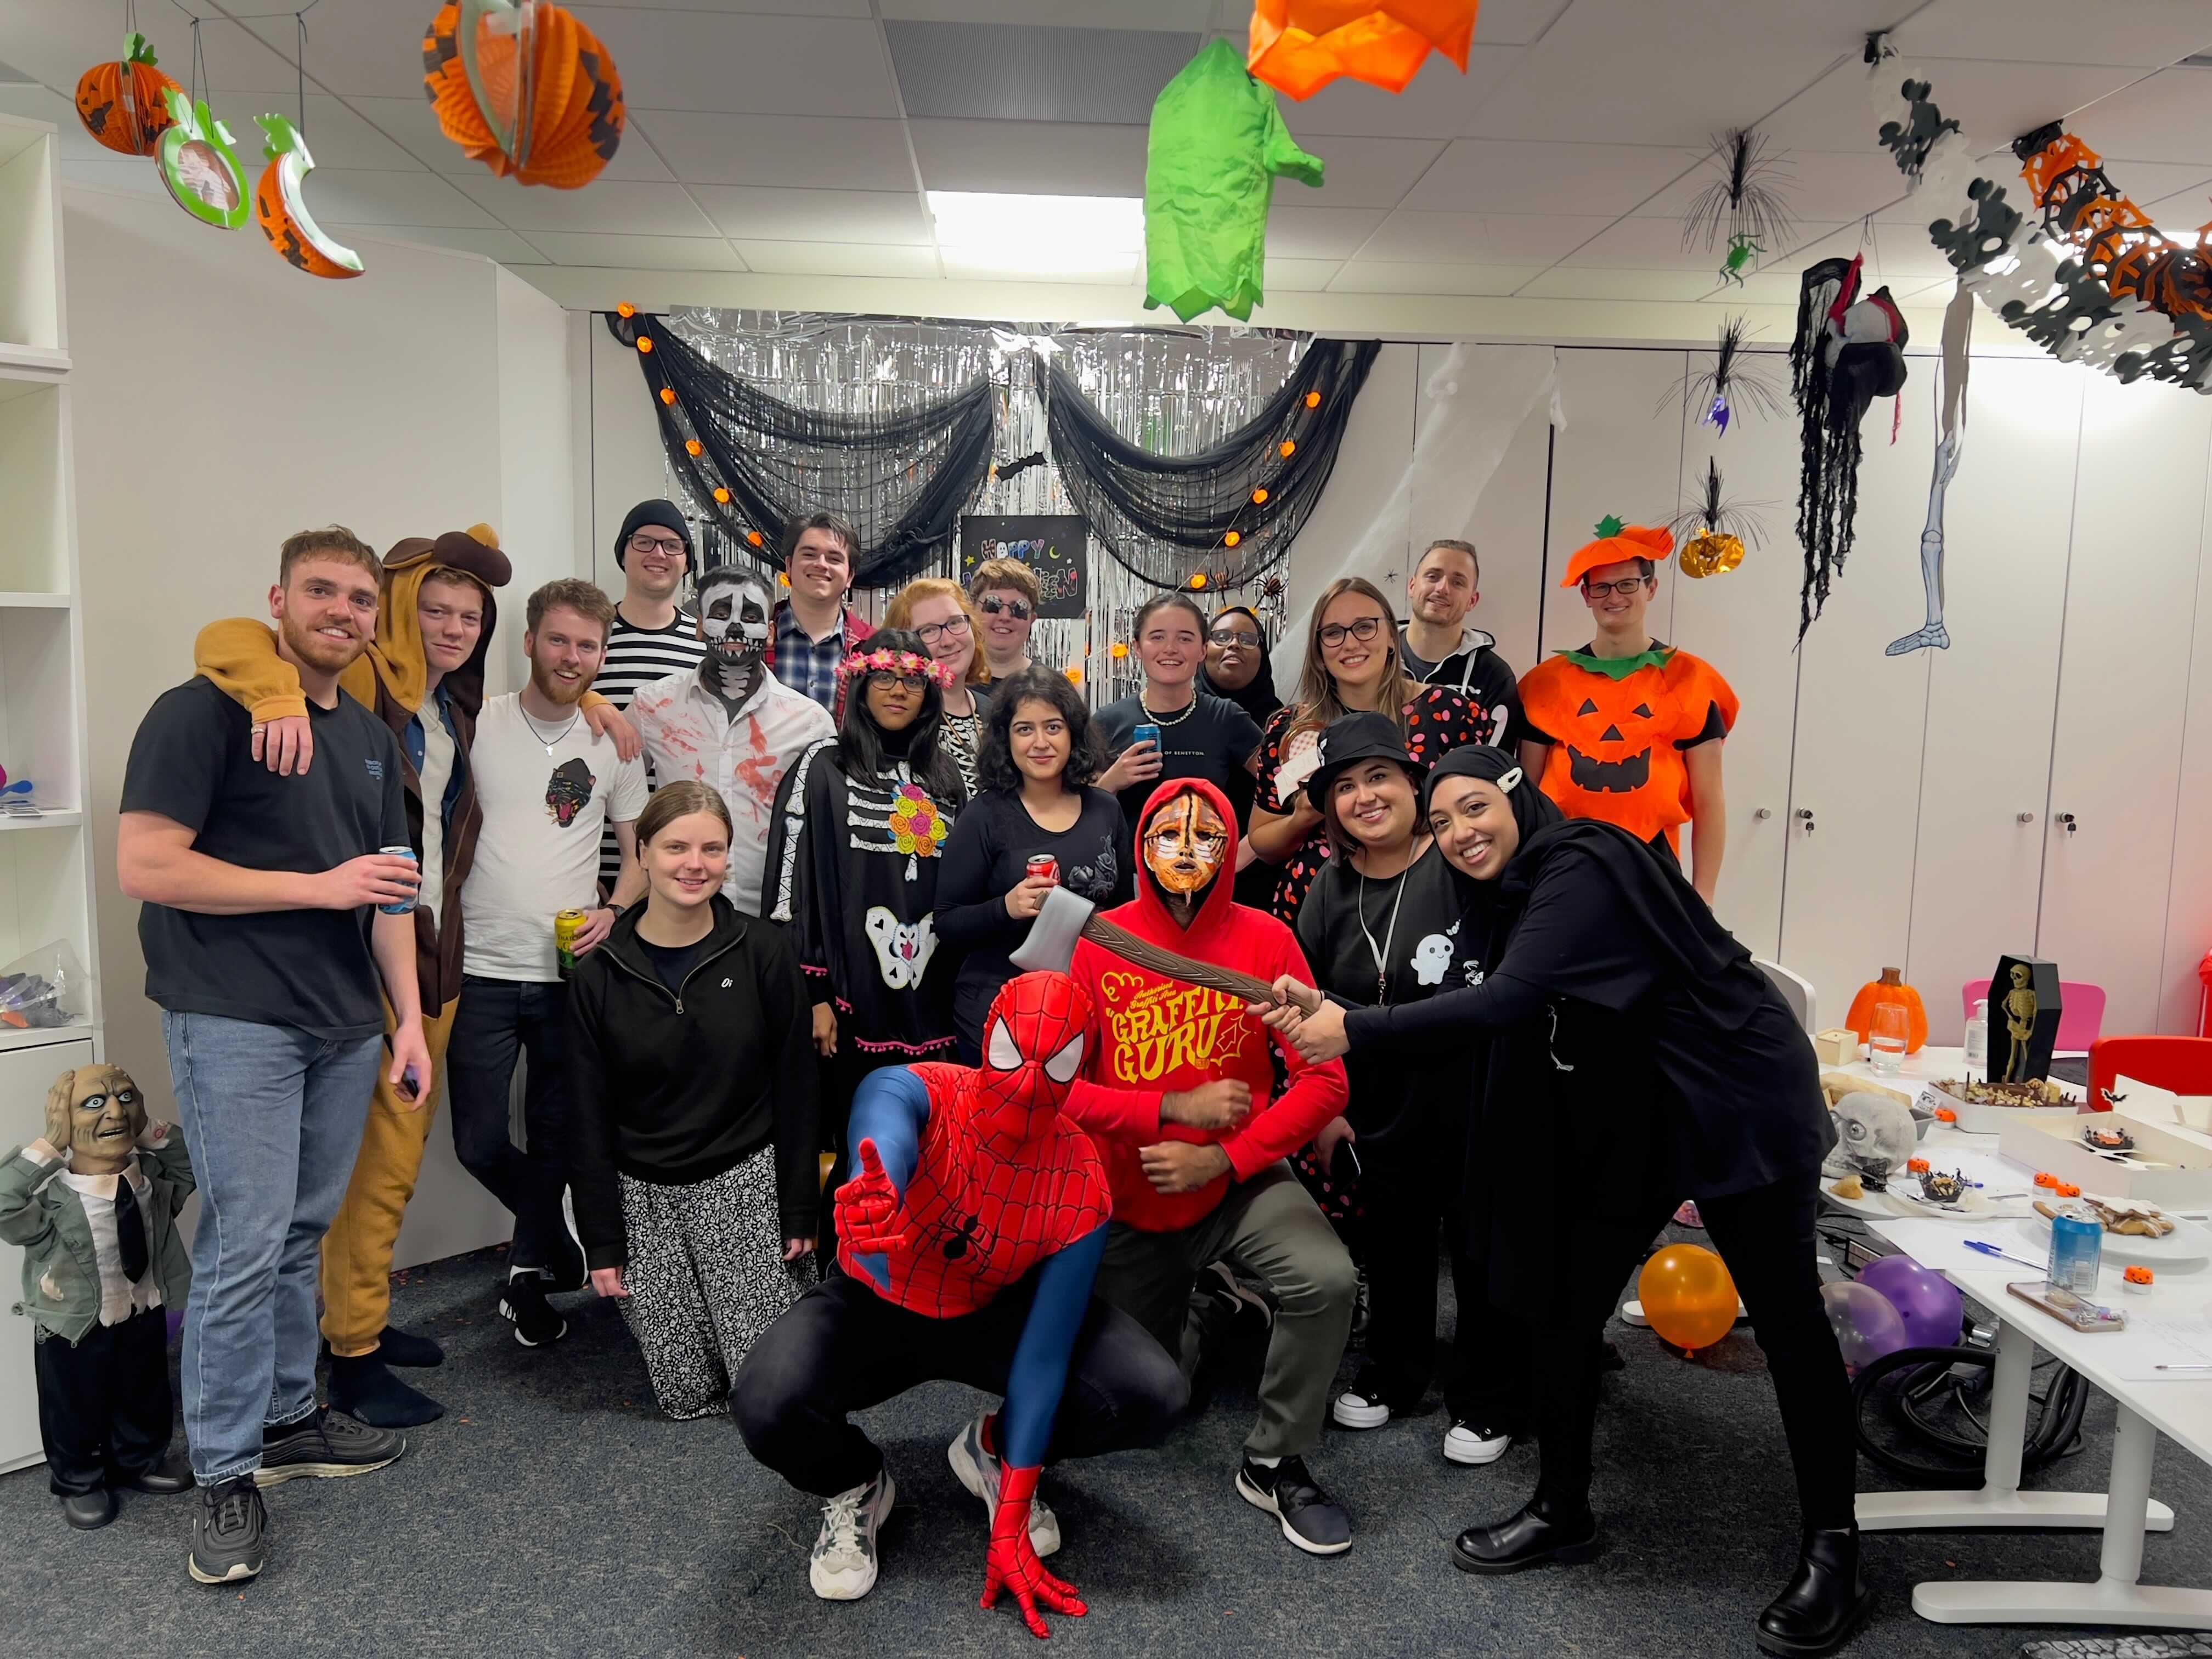 The Seccl team celebrating Halloween in the office